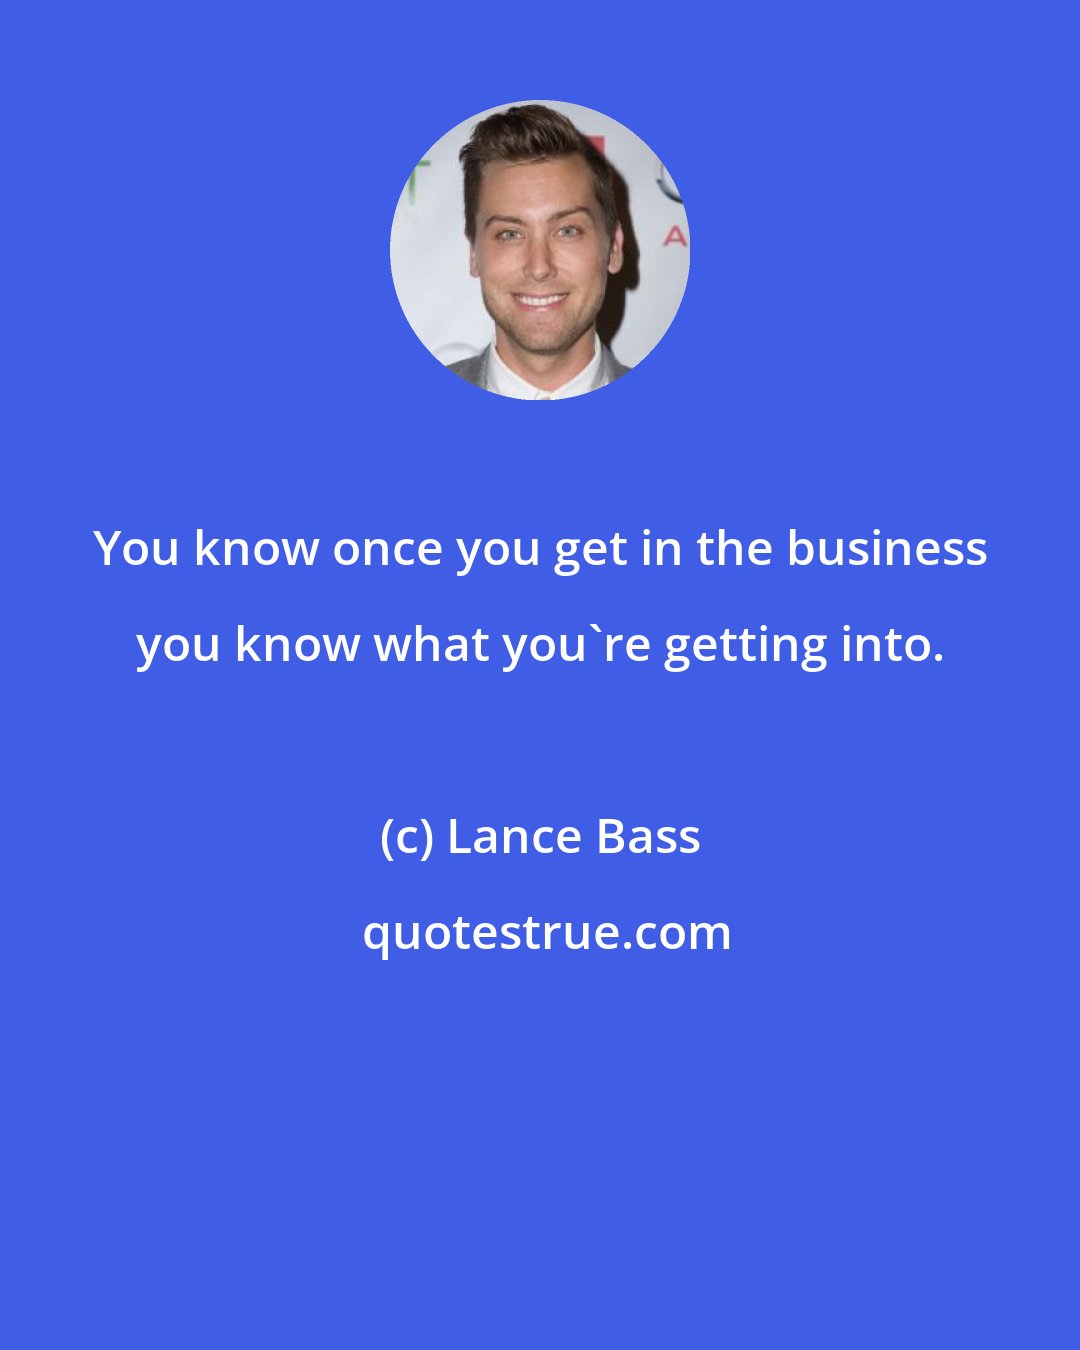 Lance Bass: You know once you get in the business you know what you're getting into.